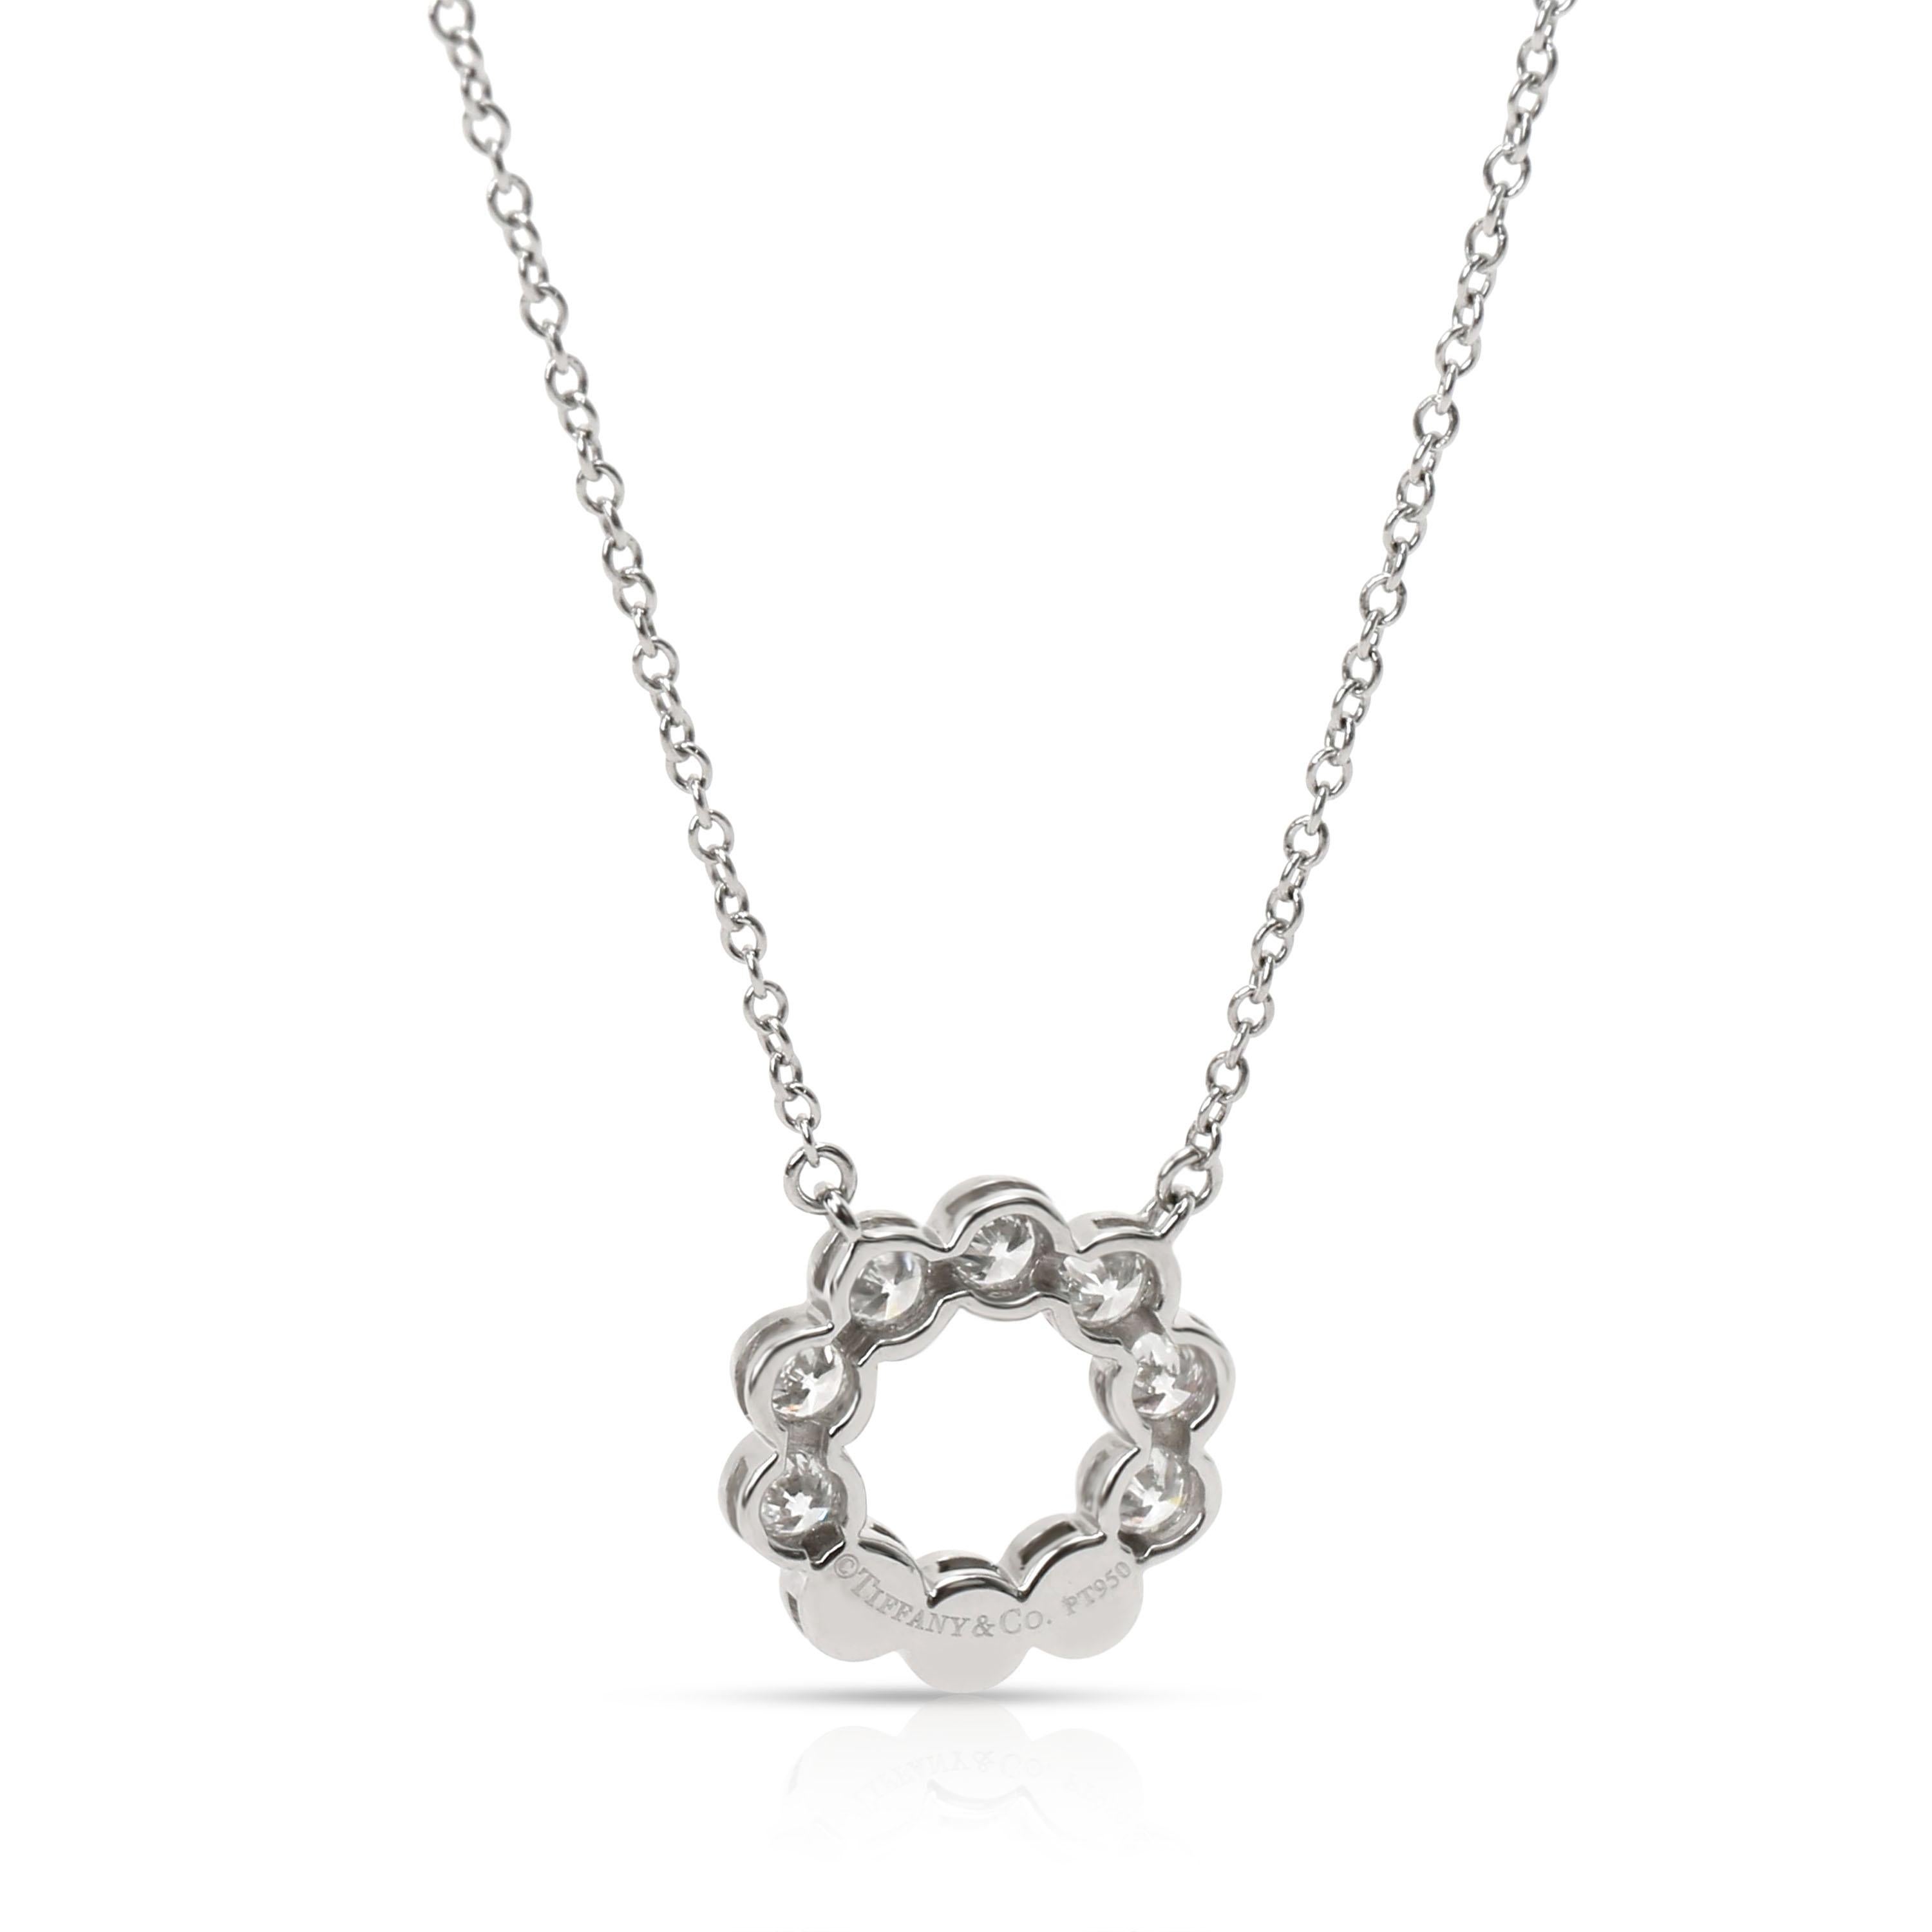 Tiffany & Co. Diamond Circle Necklace in Platinum (0.80 CTW)

PRIMARY DETAILS
SKU: 103005
Listing Title: Tiffany & Co. Diamond Circle Necklace in Platinum (0.80 CTW)
Condition Description: Retails for 7000 USD. In excellent condition and recently